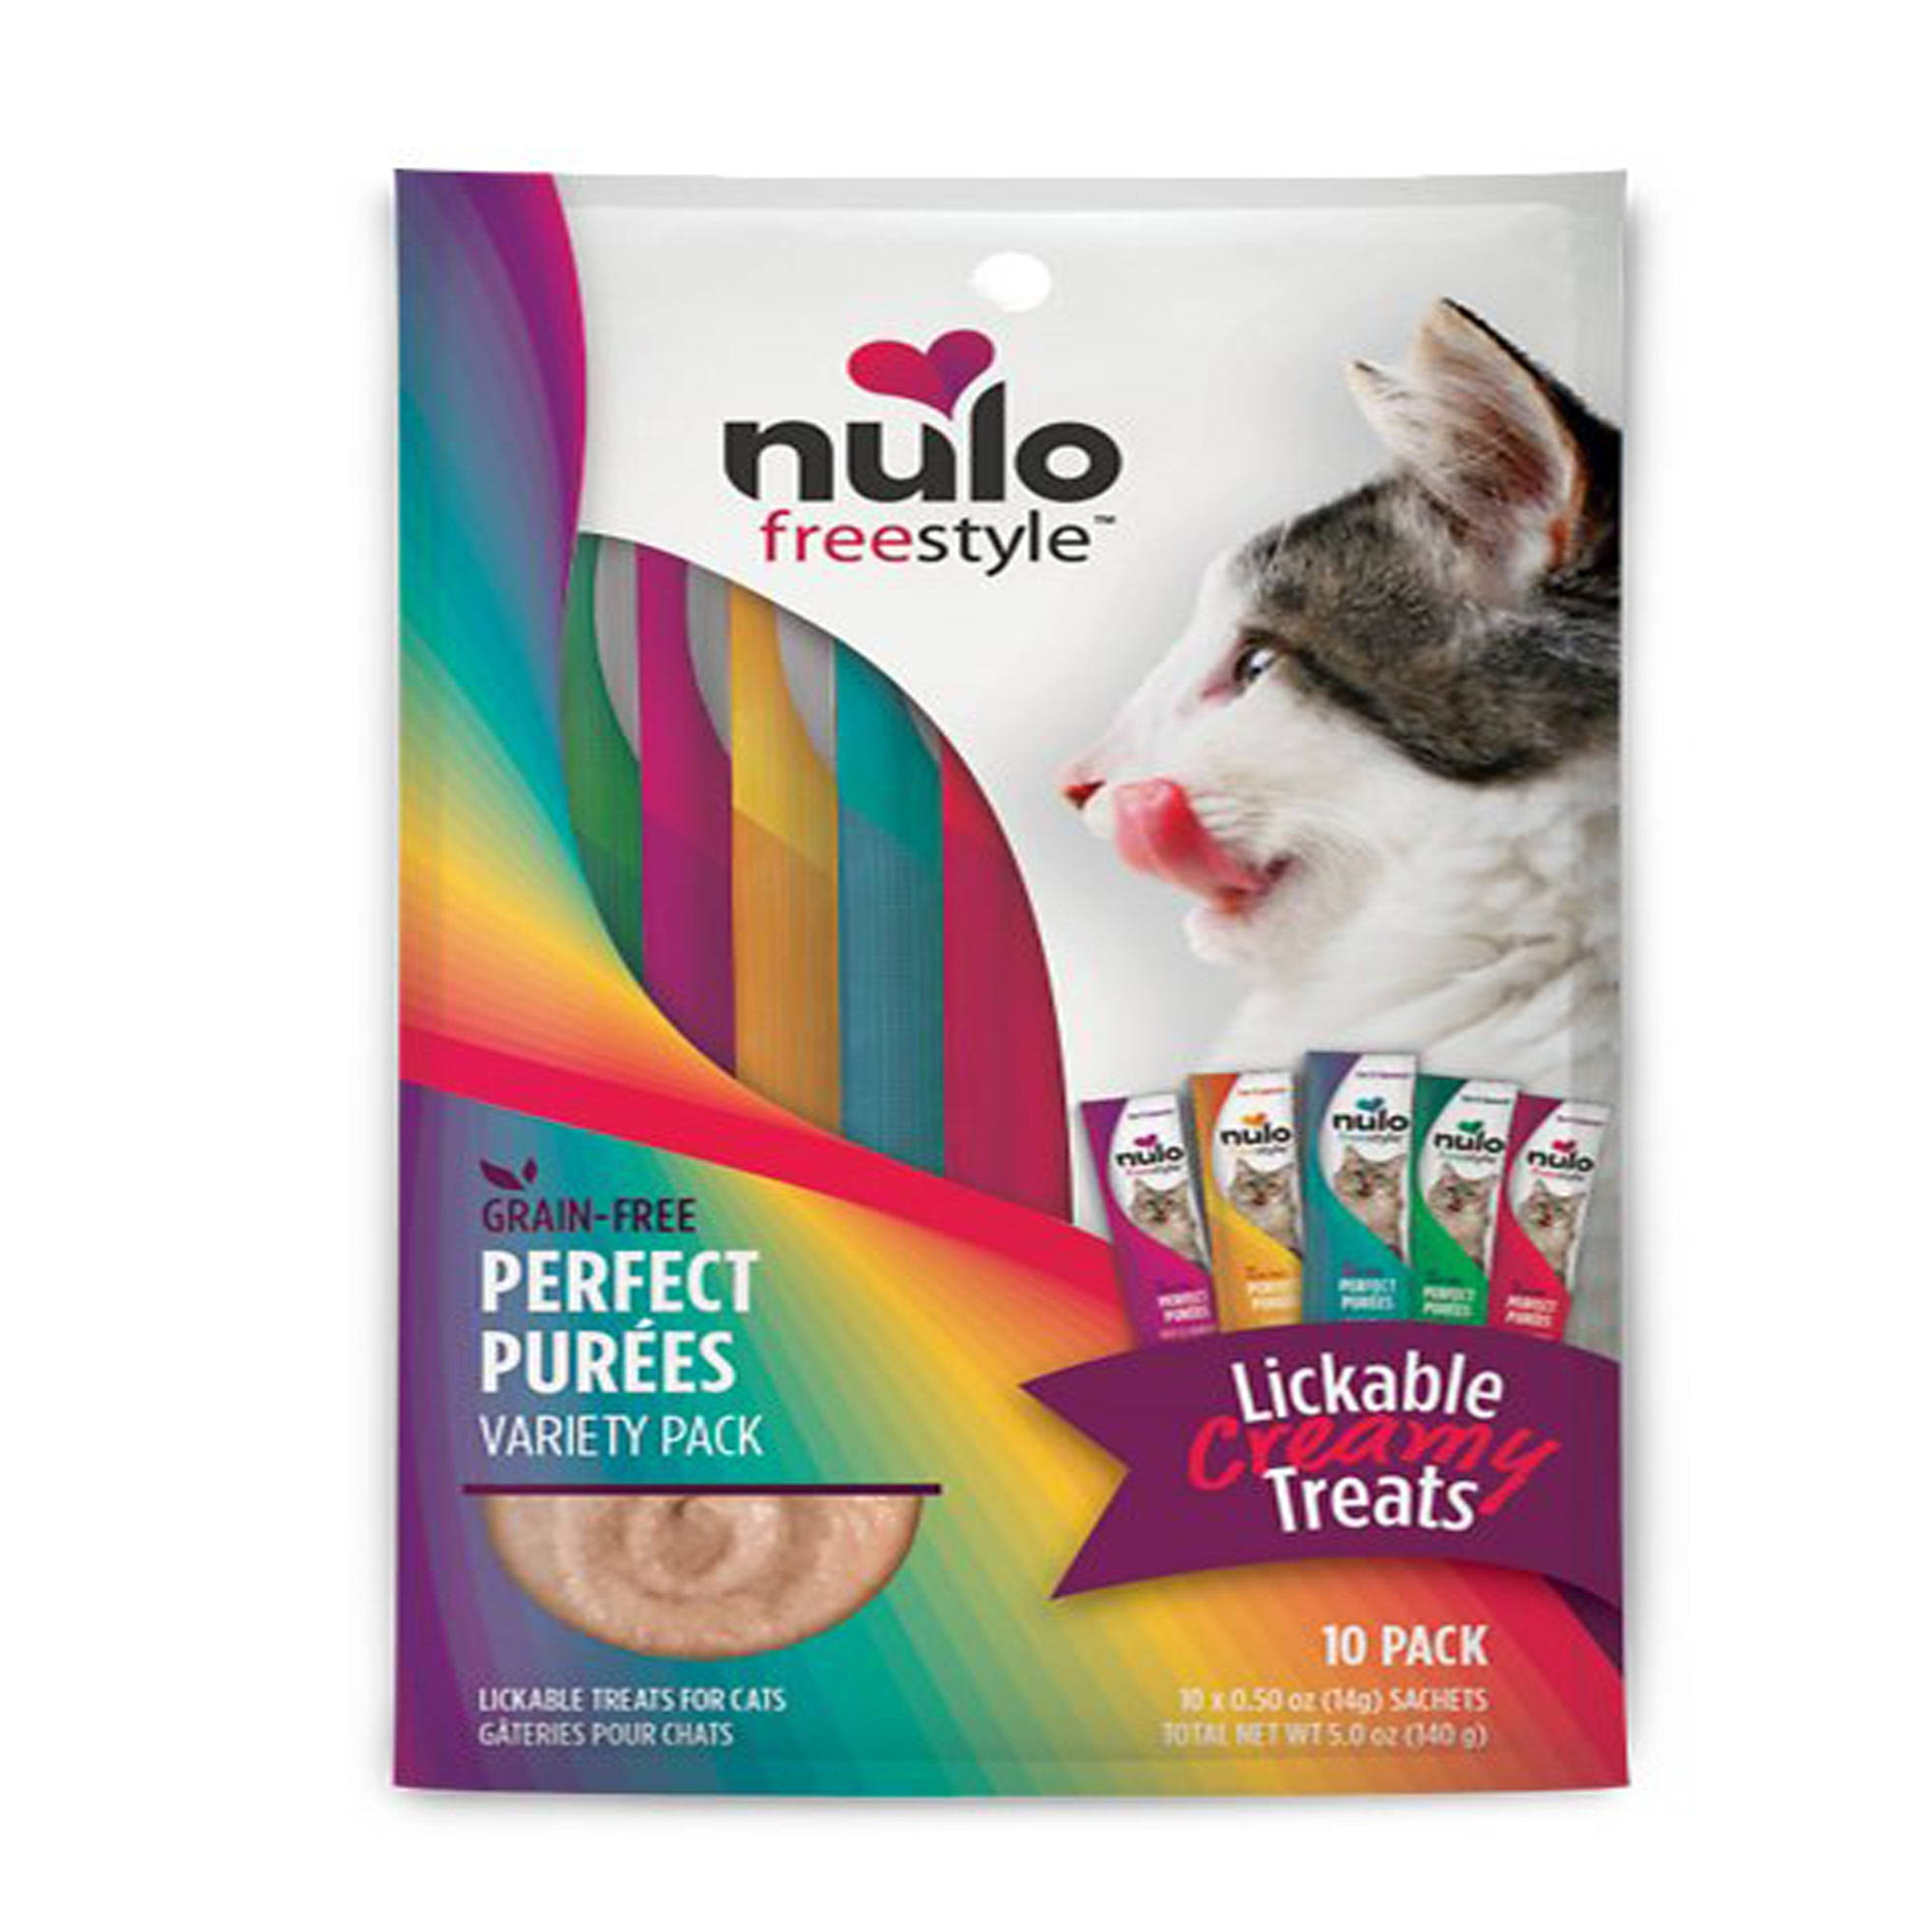 Nulo Freestyle Perfect Purees Creamy Cat Treat Variety 1Ea/0.5 oz, 10